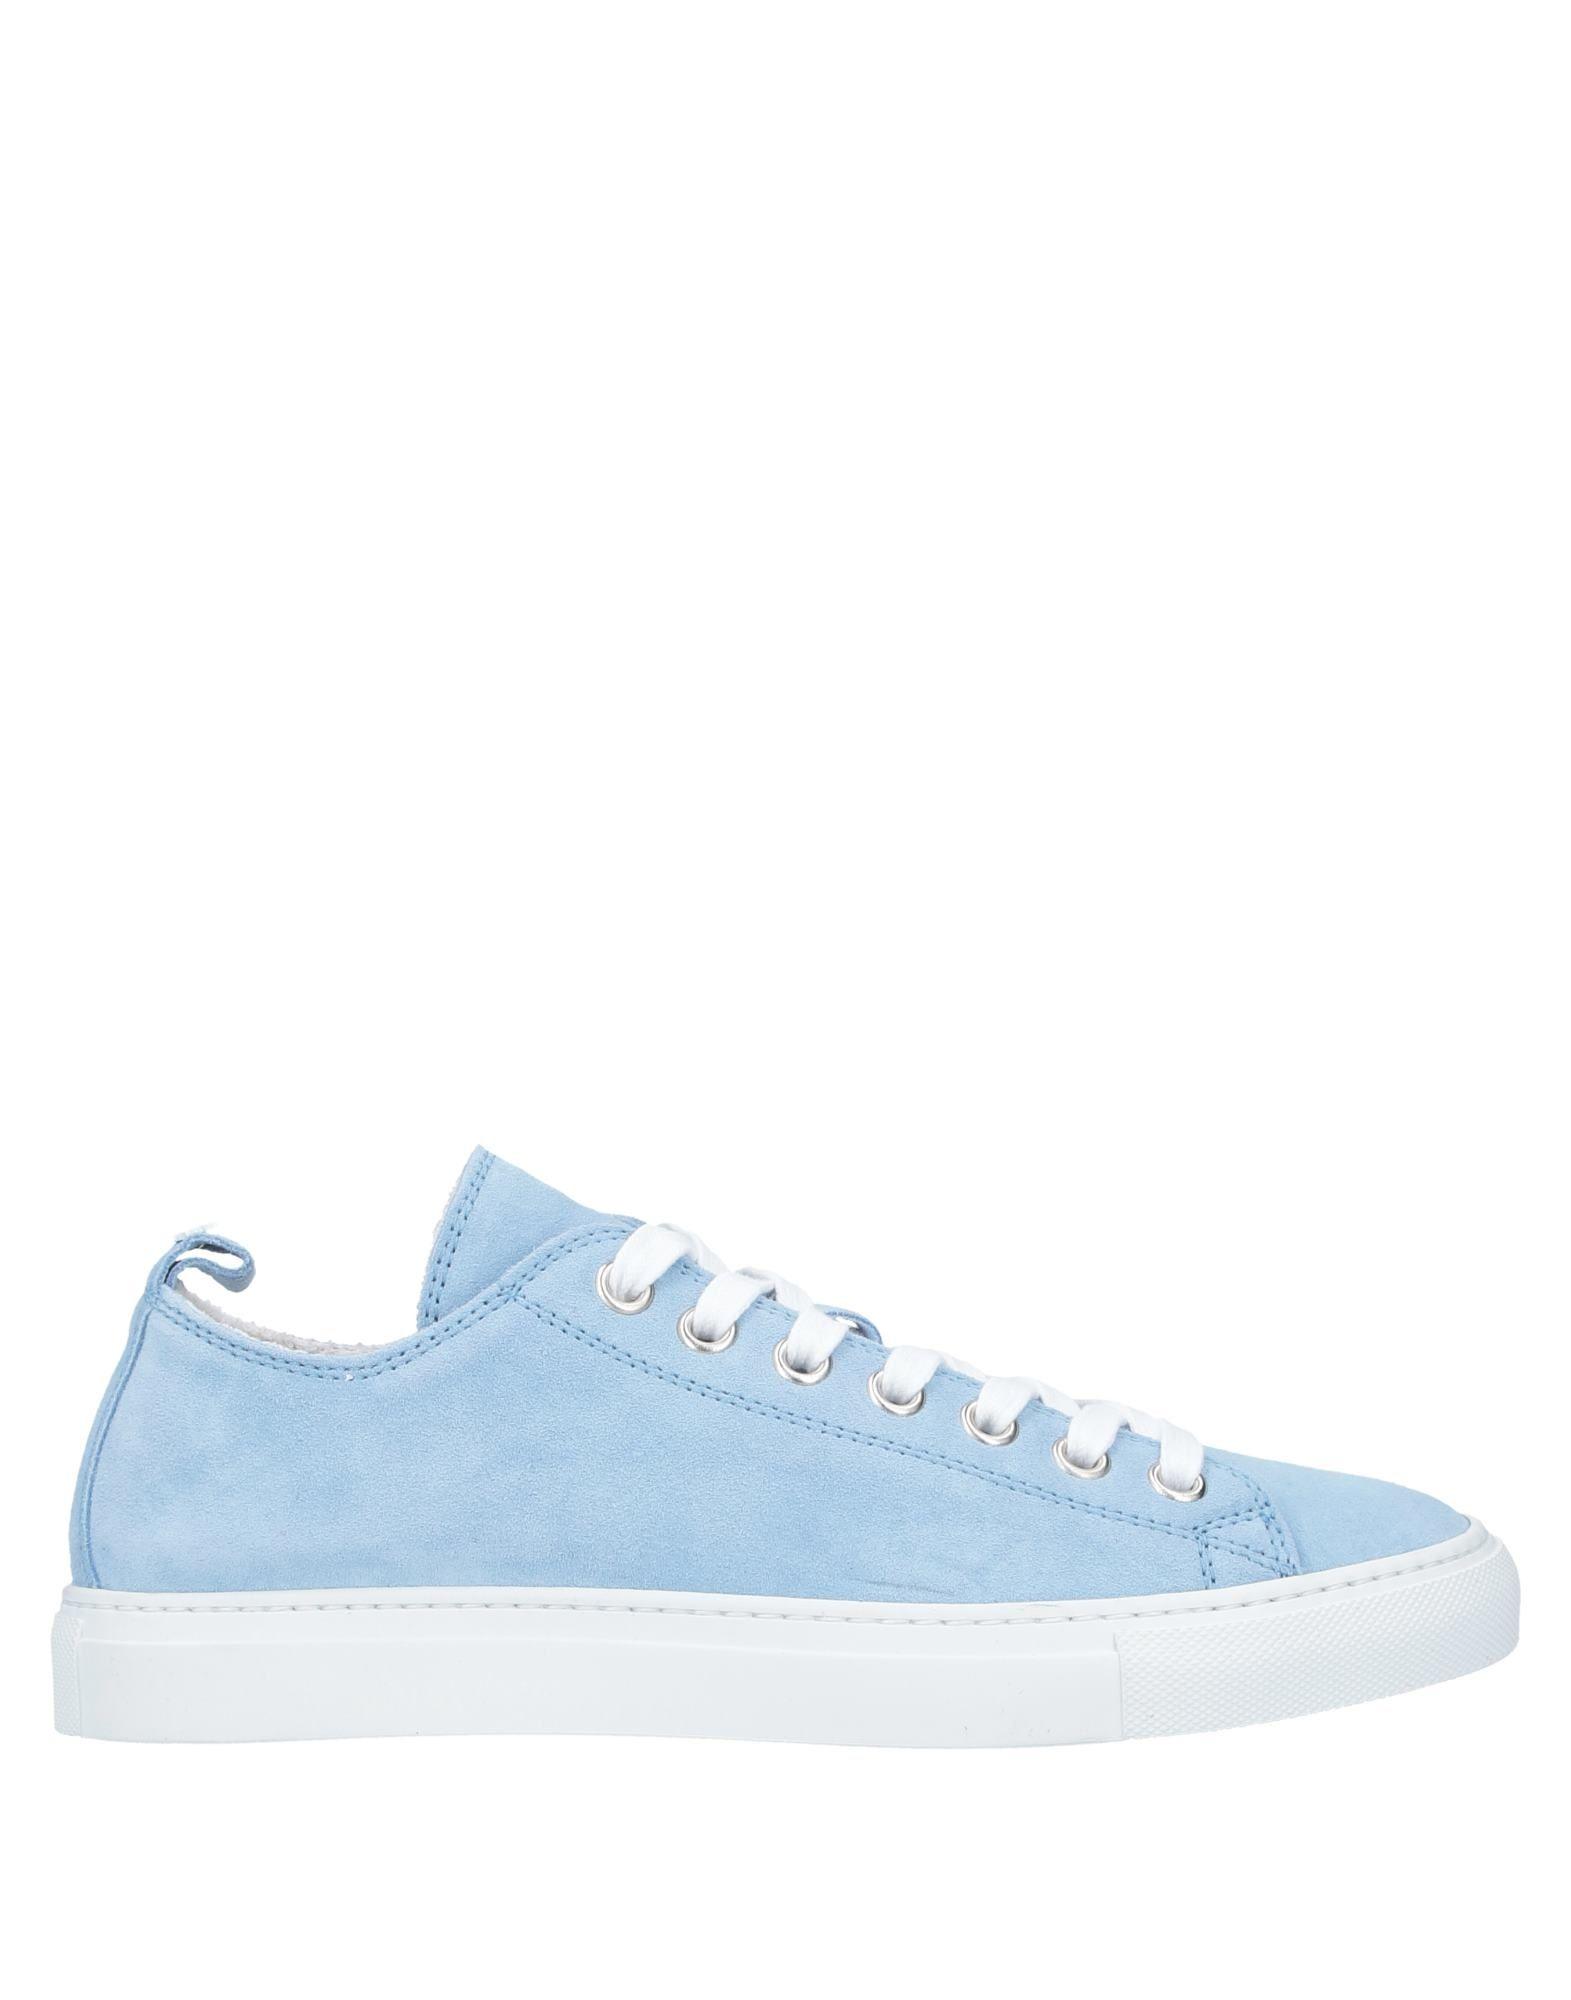 DSquared² Suede Low-tops & Sneakers in Sky Blue (Blue) for Men - Lyst